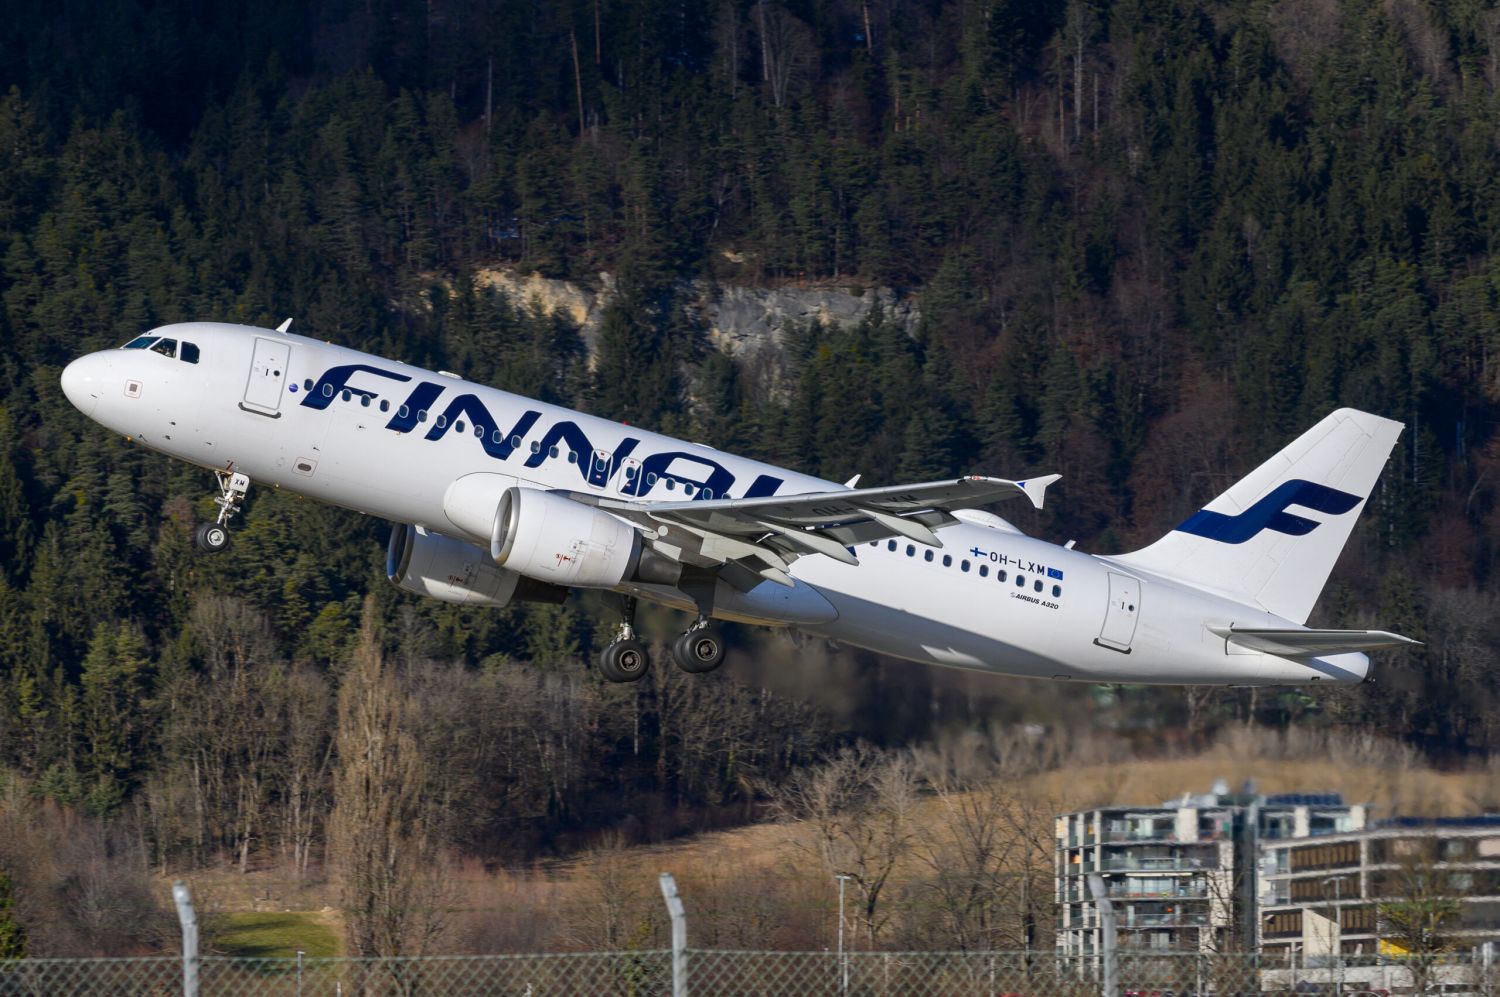 Finnair is increasing its flights in Europe and Japan, adding a destination in Poland